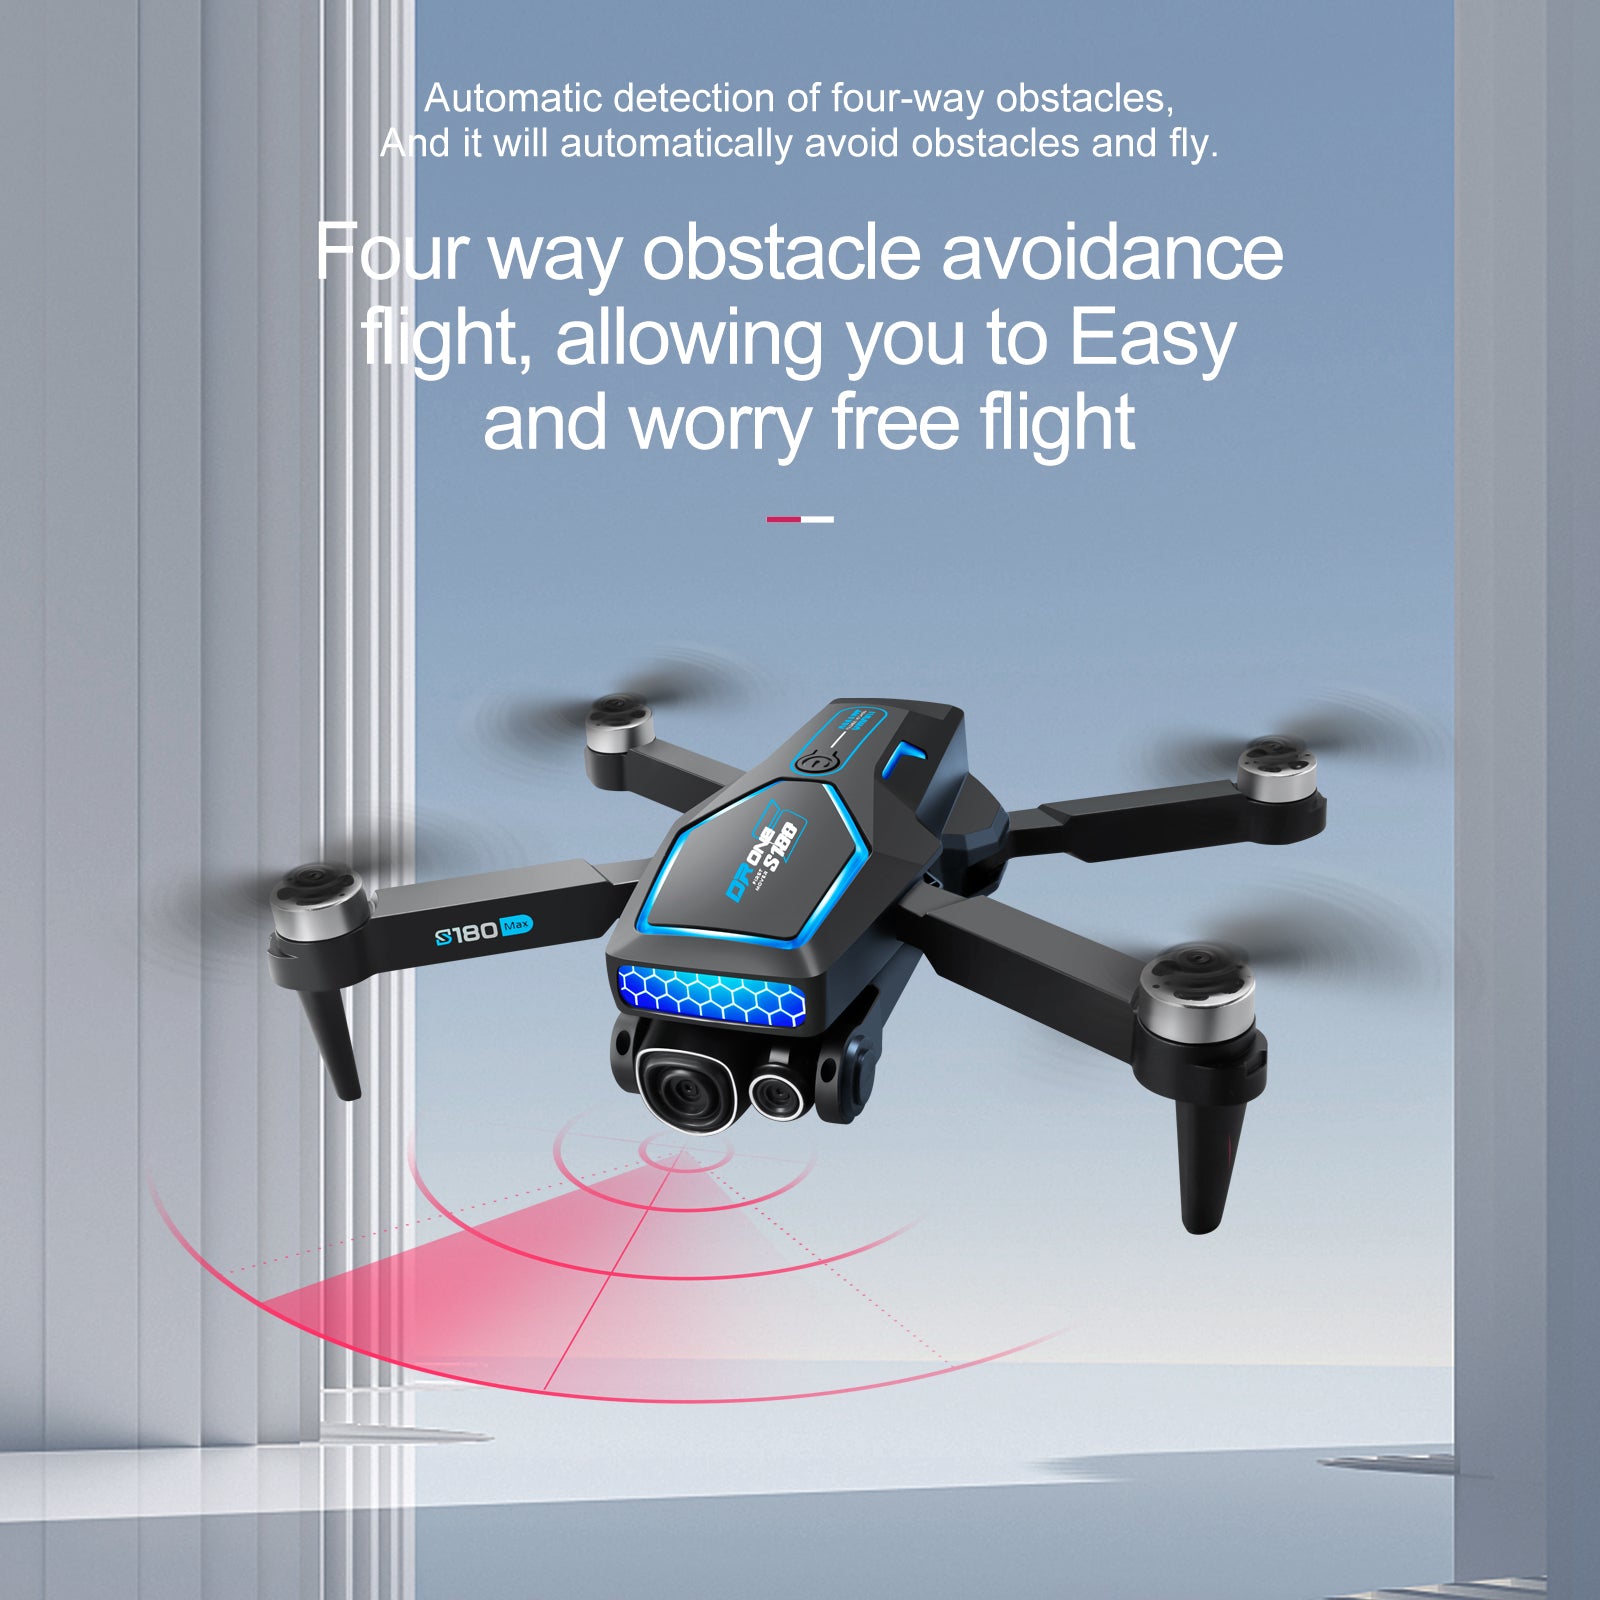 S180 Drone detects obstacles, avoids them safely, and follows waypoints for effortless flight.